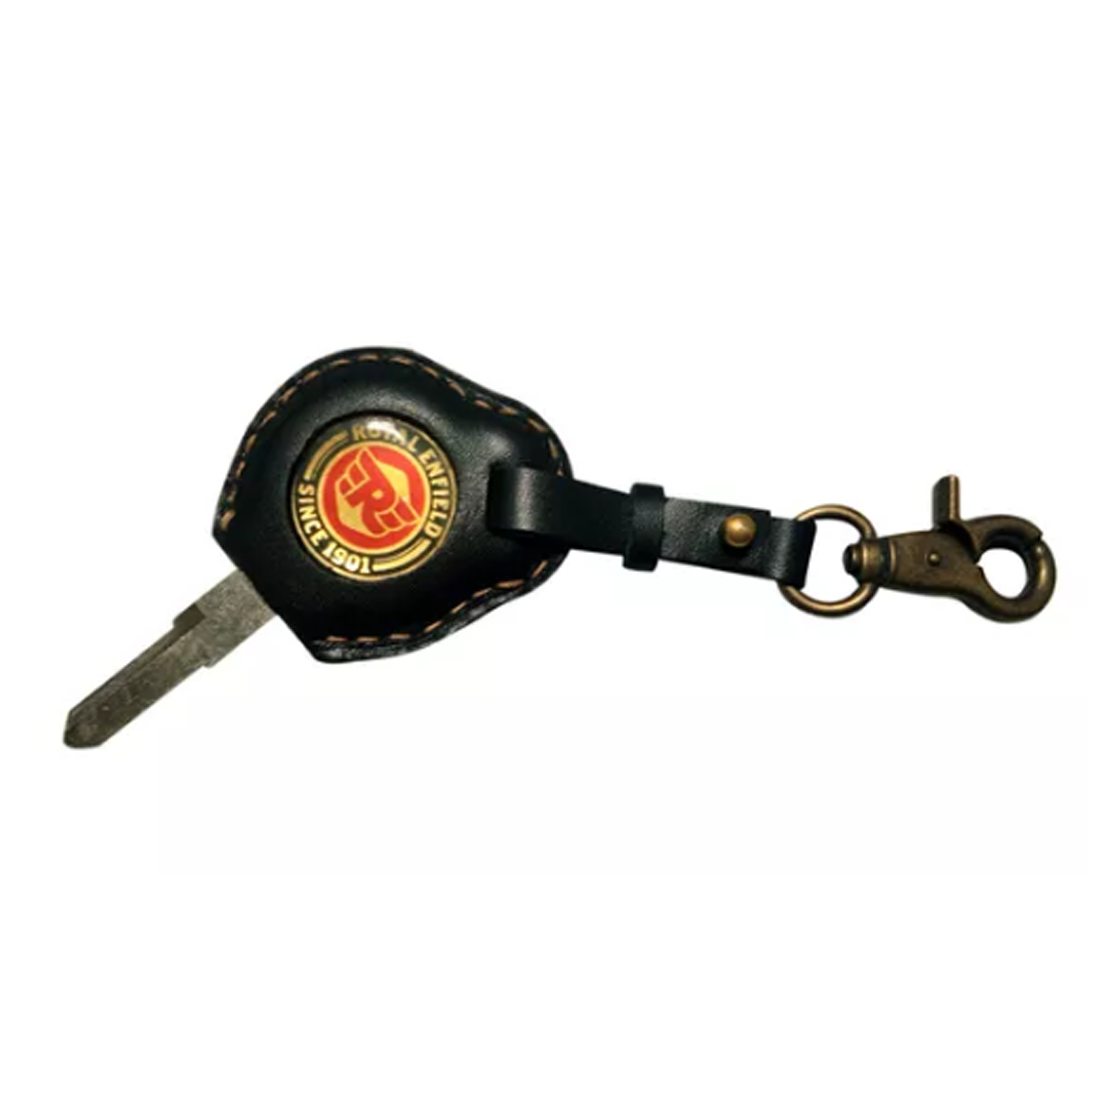 royal enfield key cover online